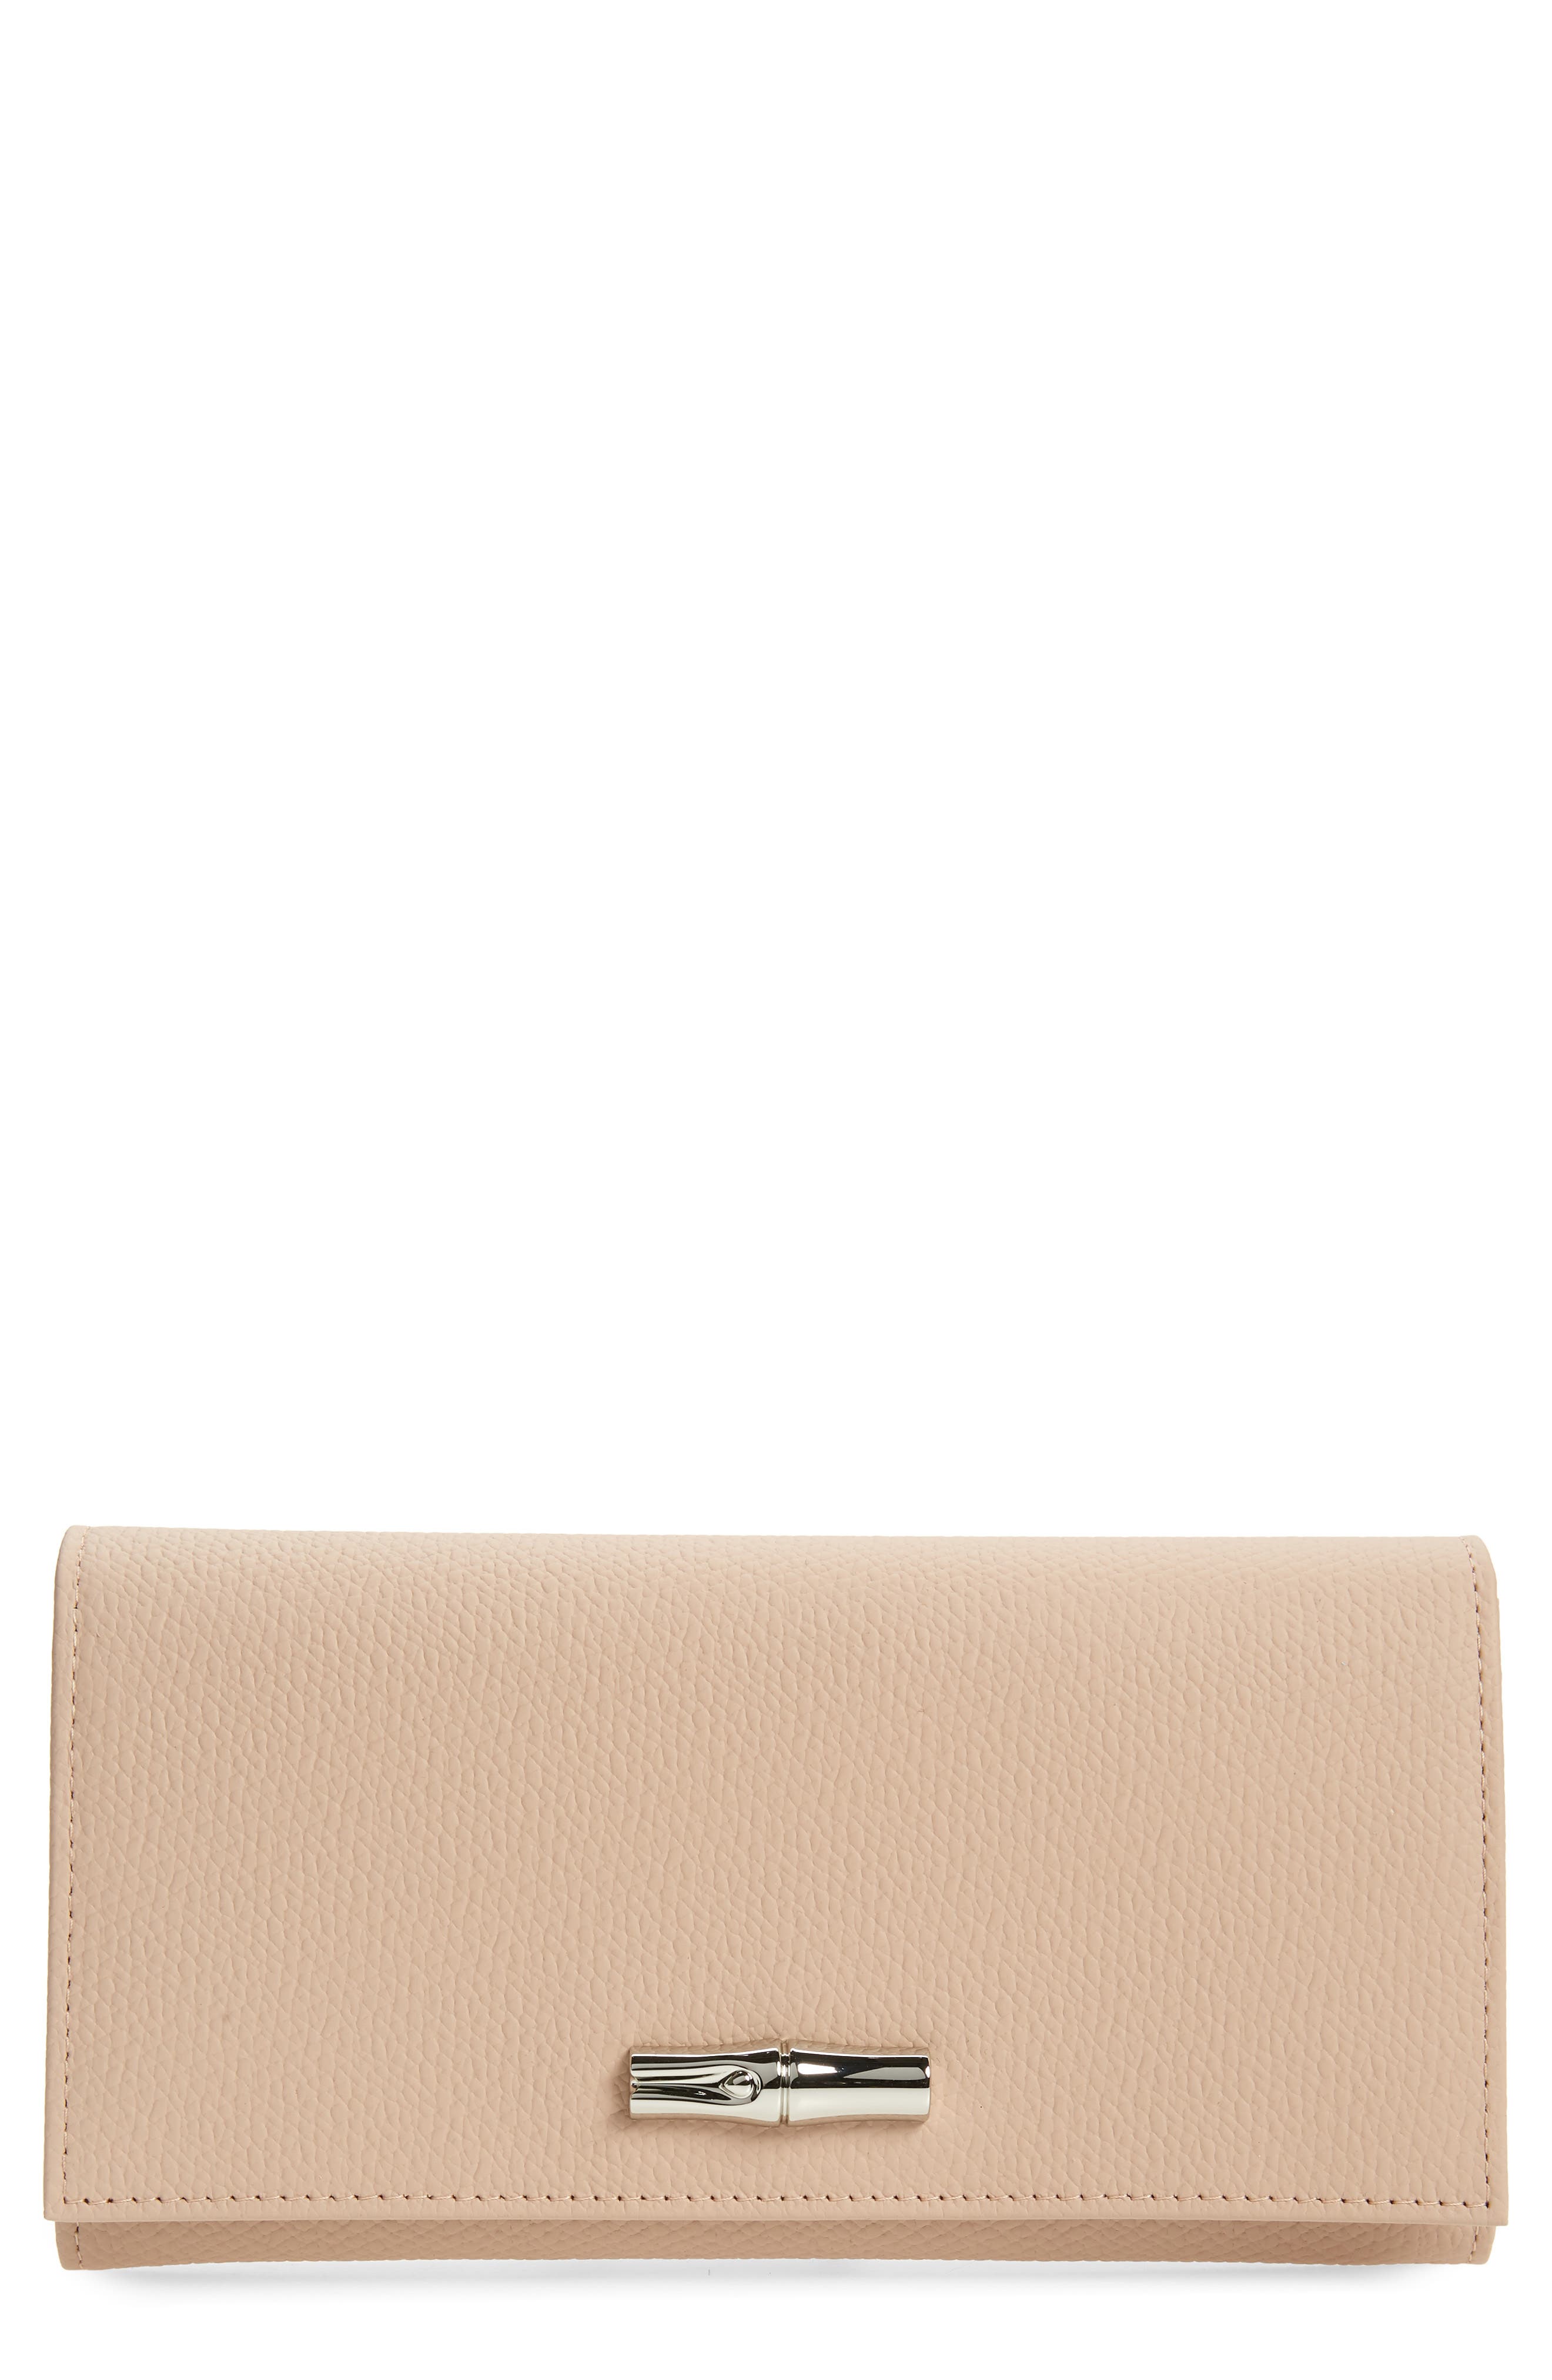 Longchamp Roseau Leather Continental Wallet in Powder at Nordstrom